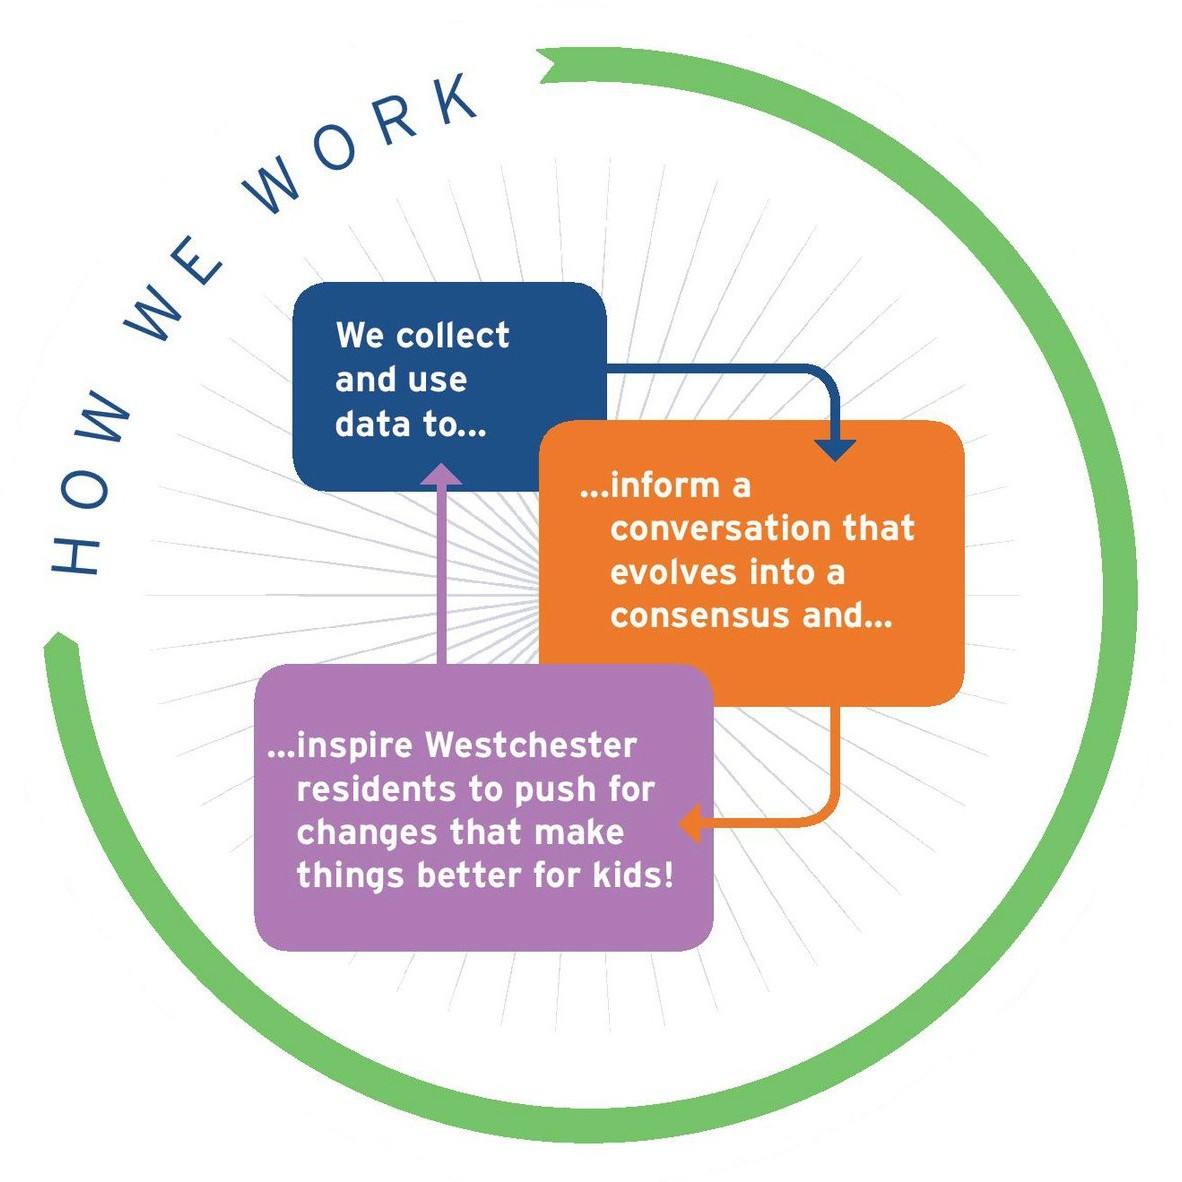 How We Work: We collect and use data to... ...inform a conversation that evolves into a consensus and... ...inspire Westchester residents to push for changes that make things better for kids!